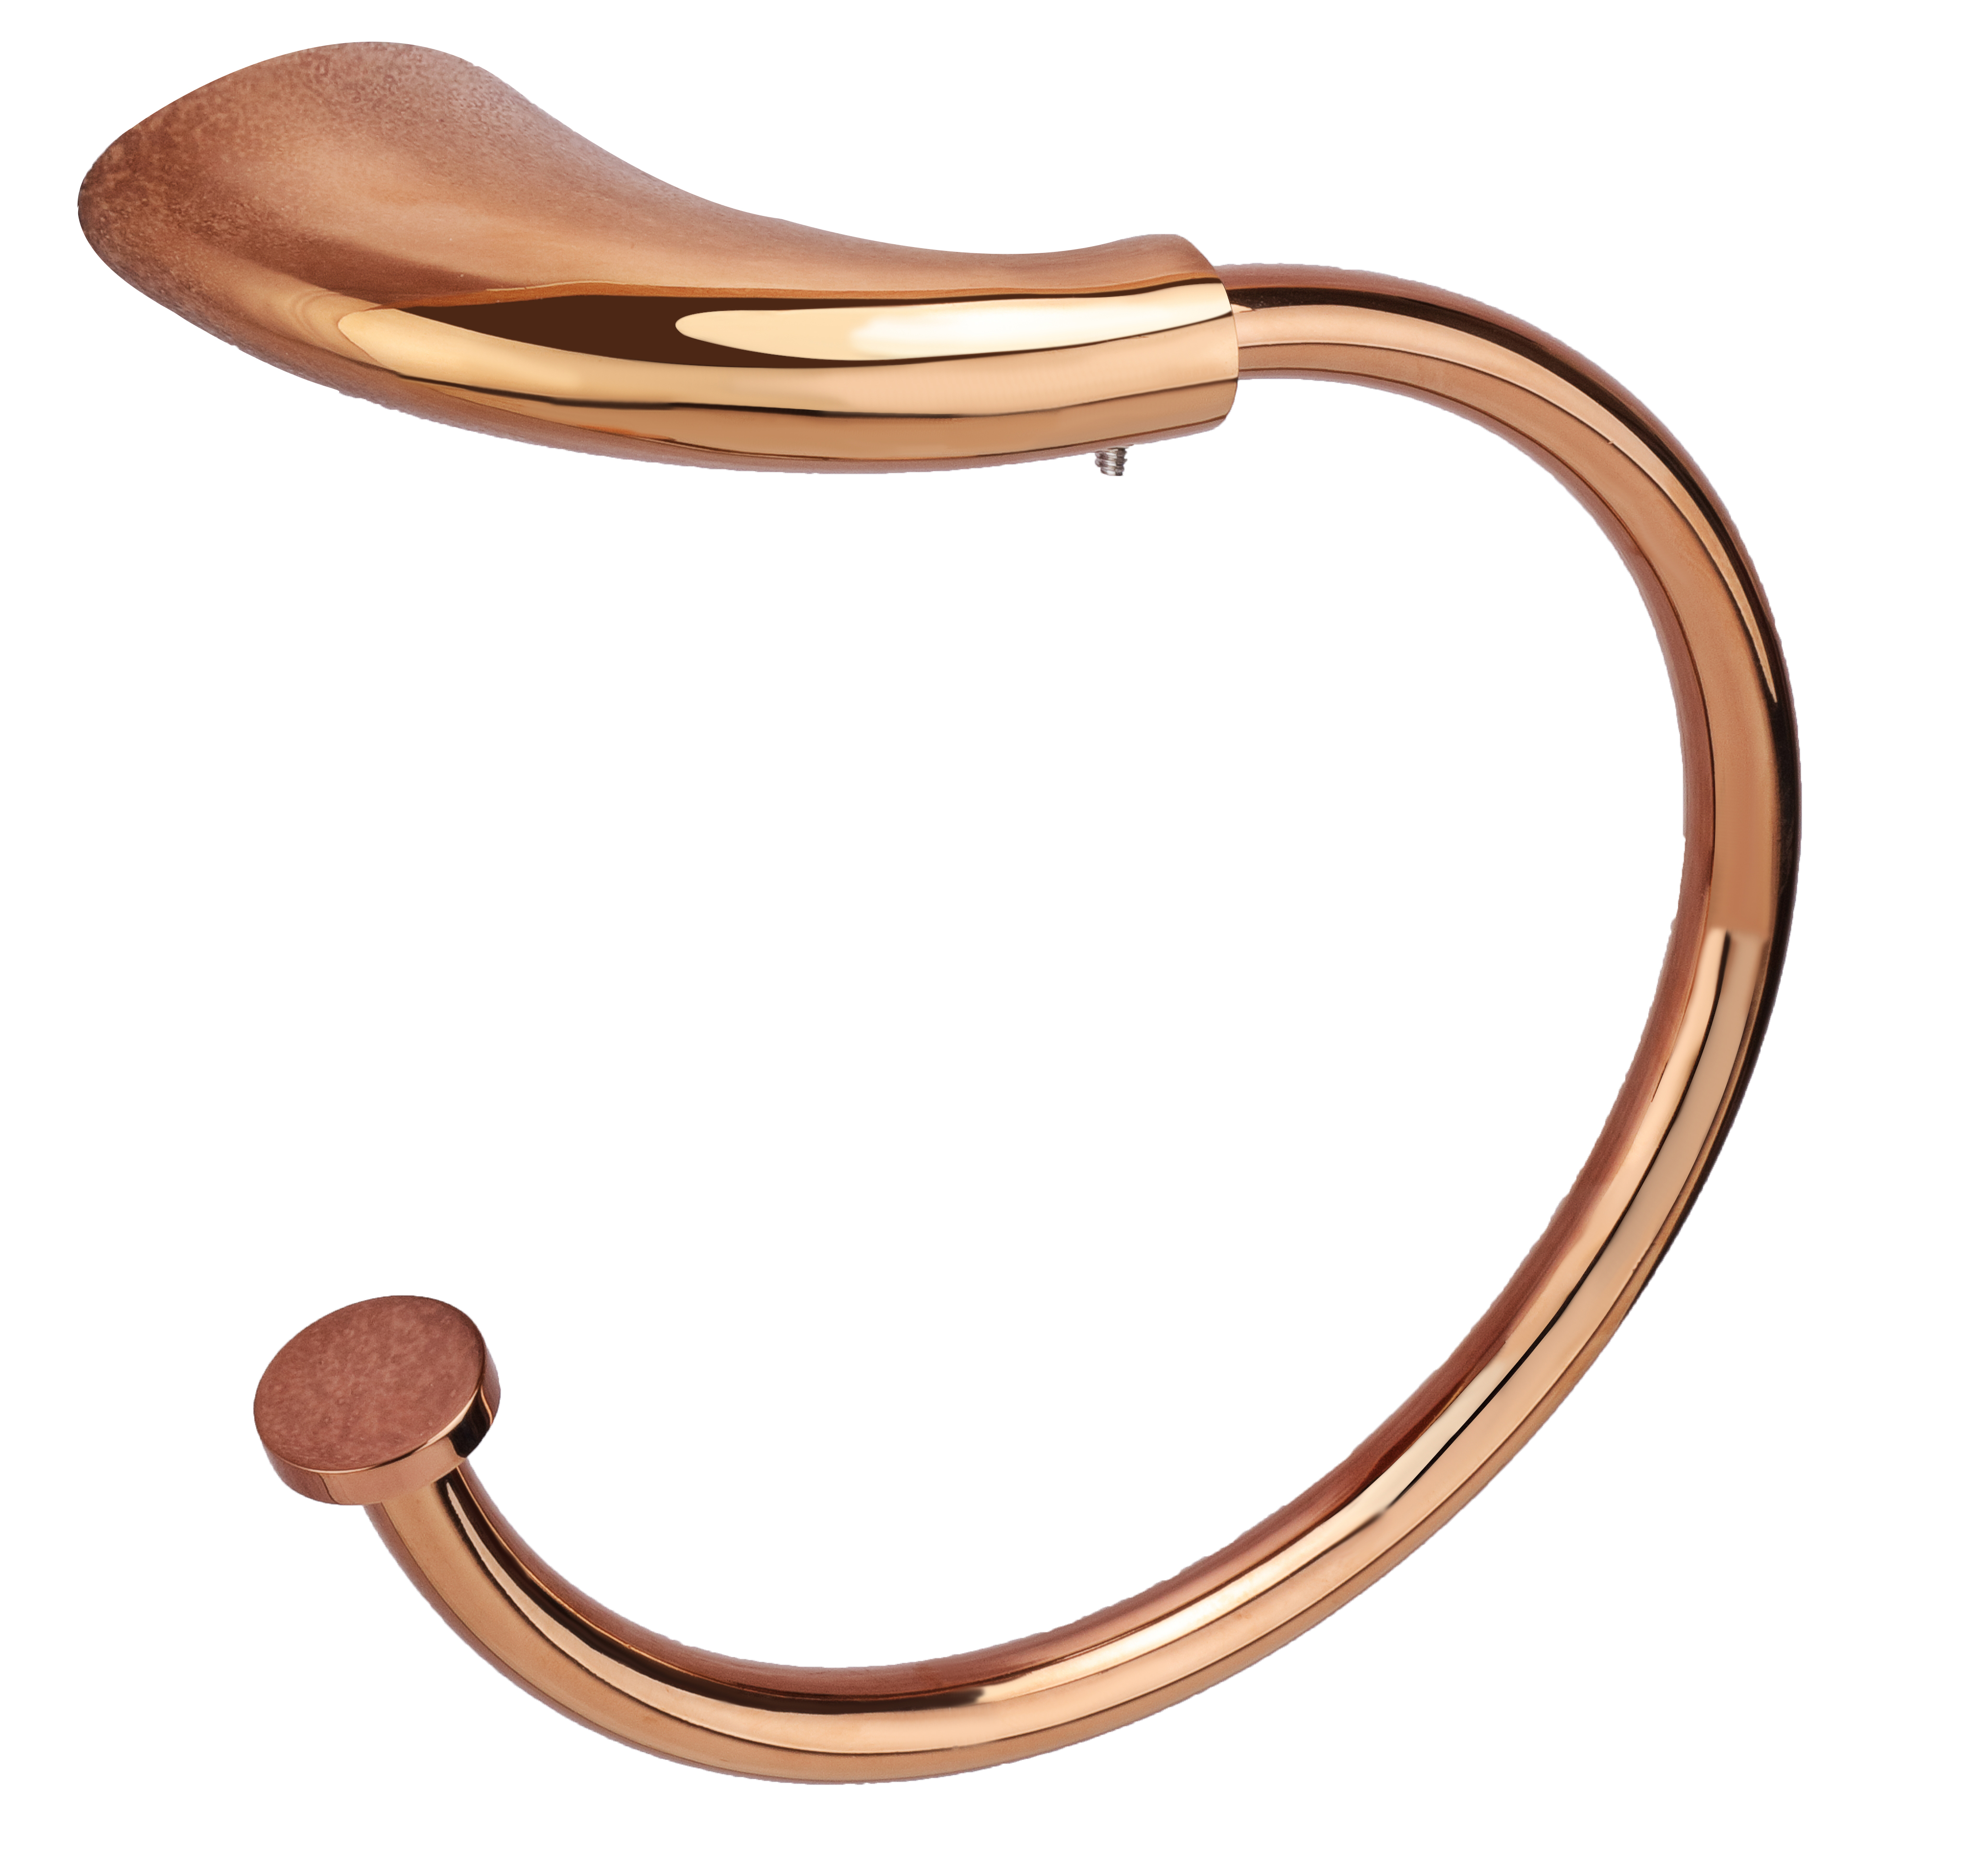 Aquieen Entice Wall Mounted Napkin Ring Brass (Rose Gold)